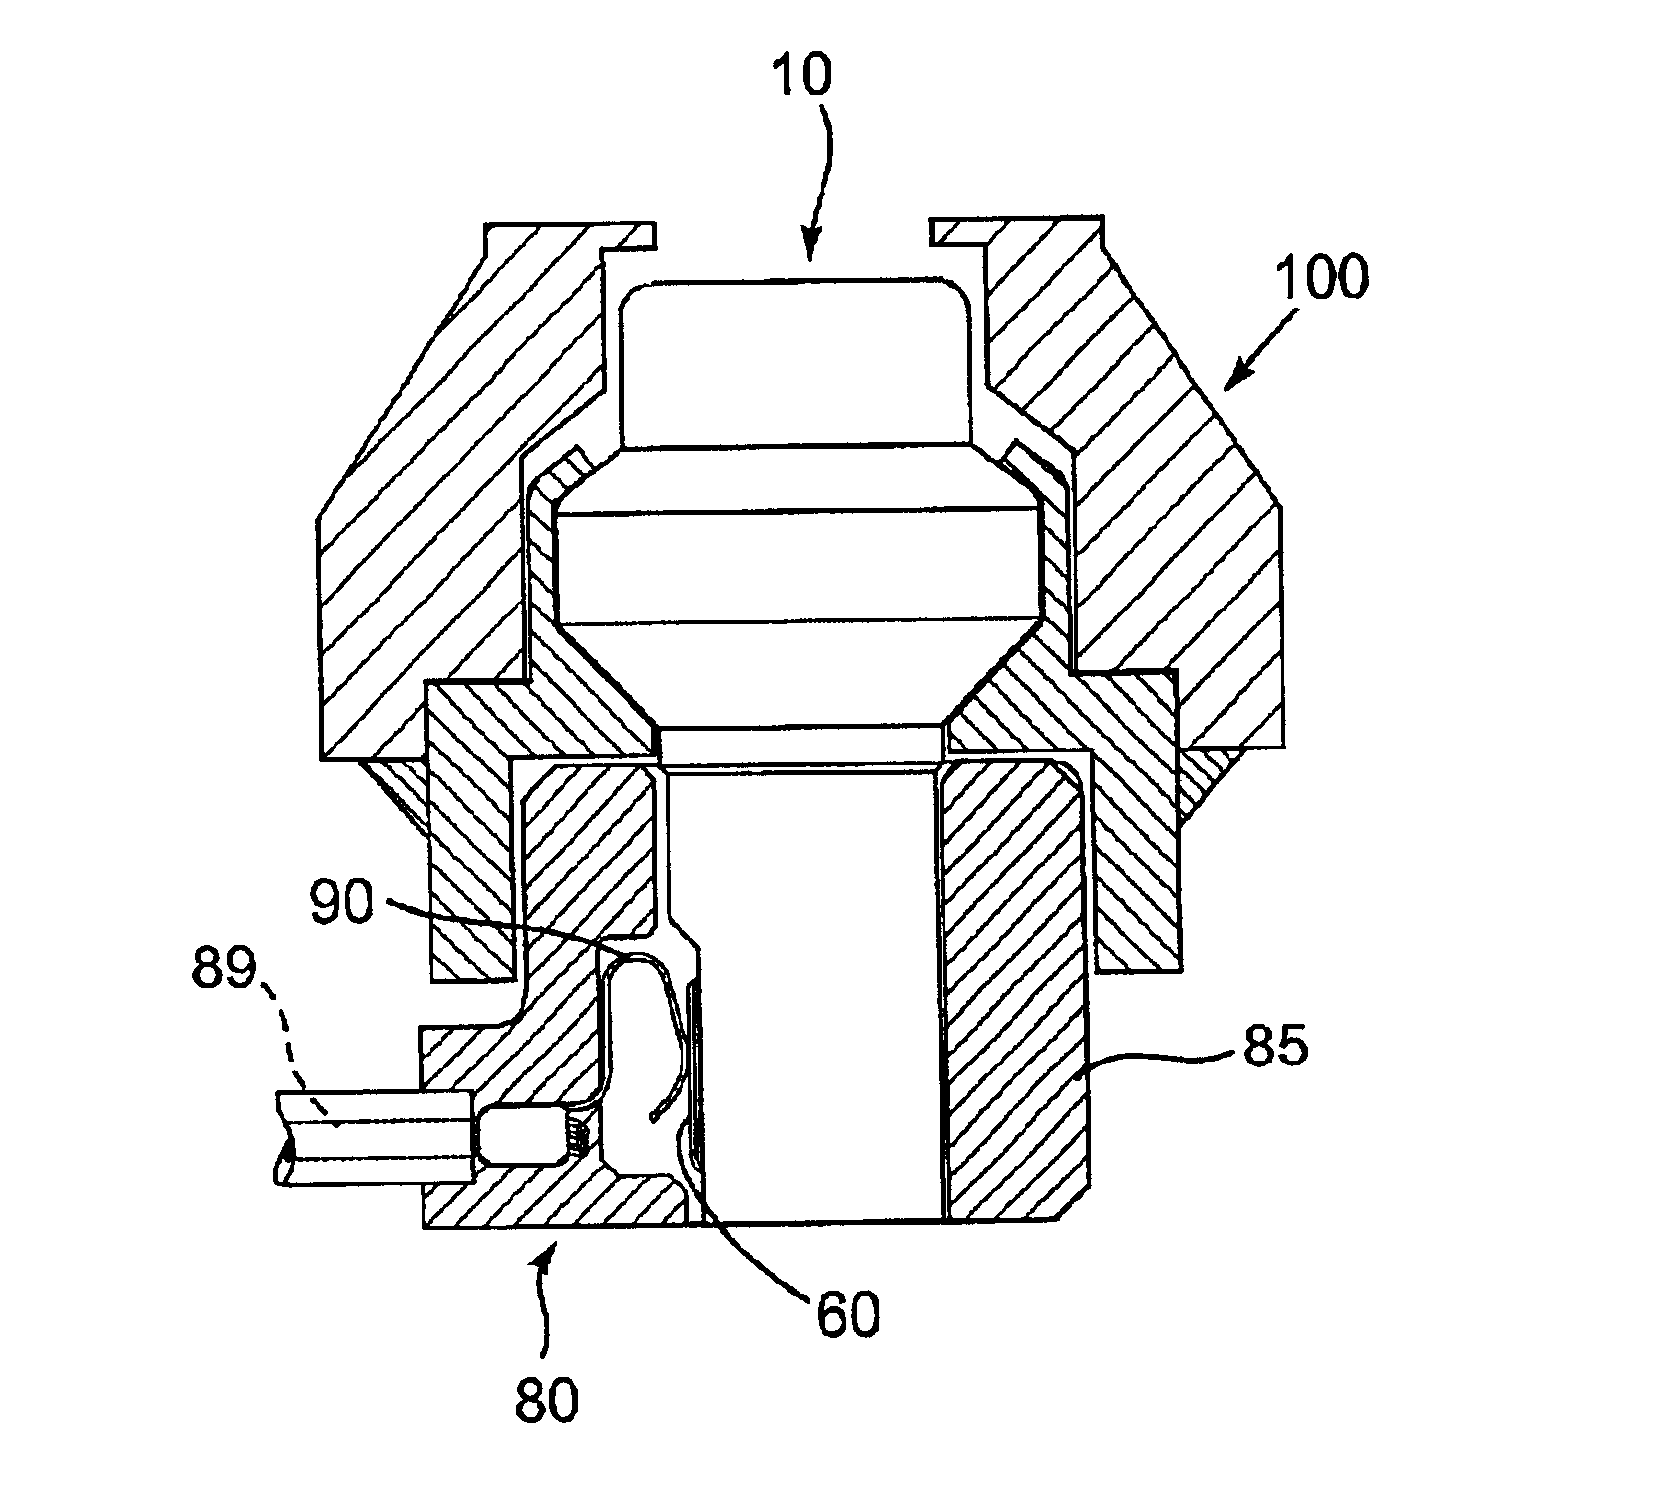 Pyrotechnic initiator with on-board control circuitry